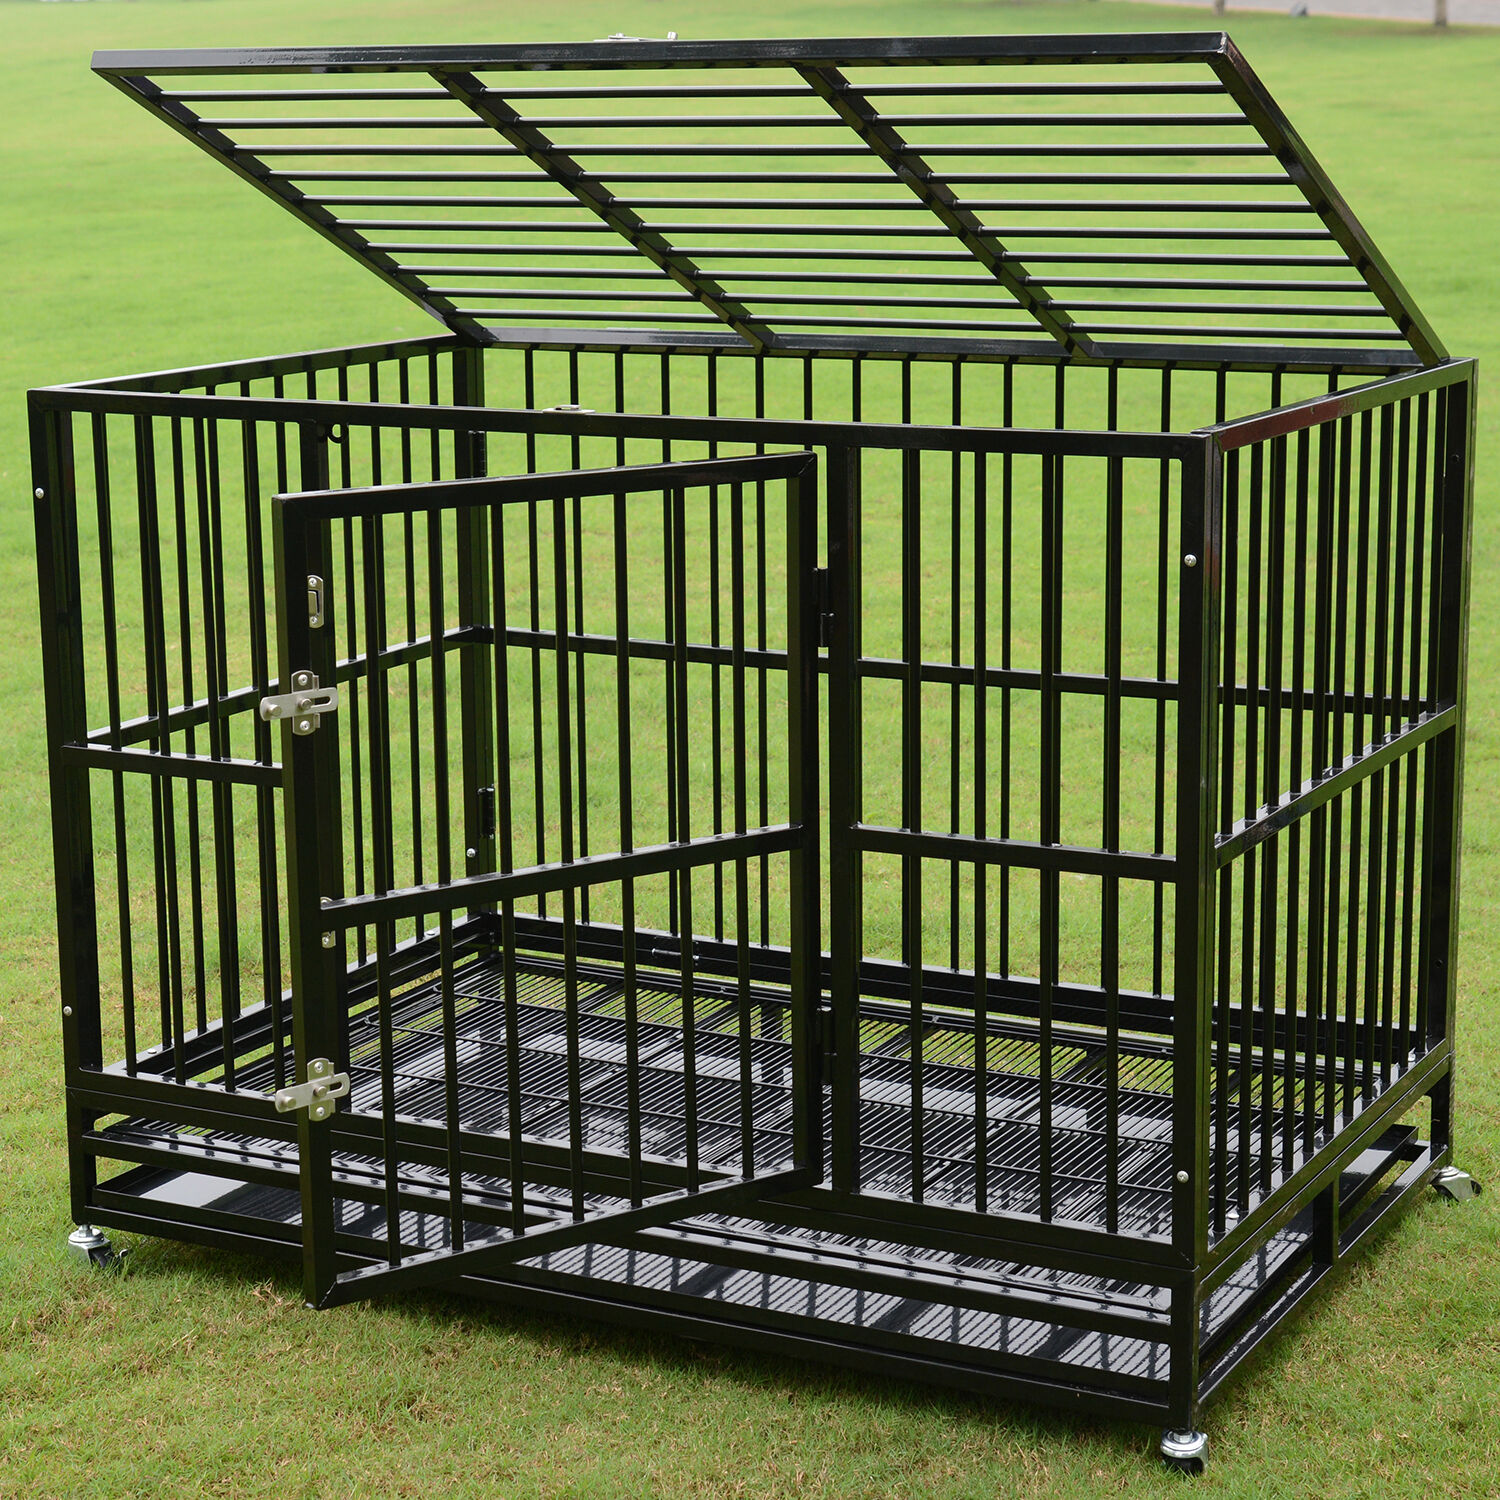 37" Dog Kennel w Wheels Portable Pet Puppy Carrier Crate Crate